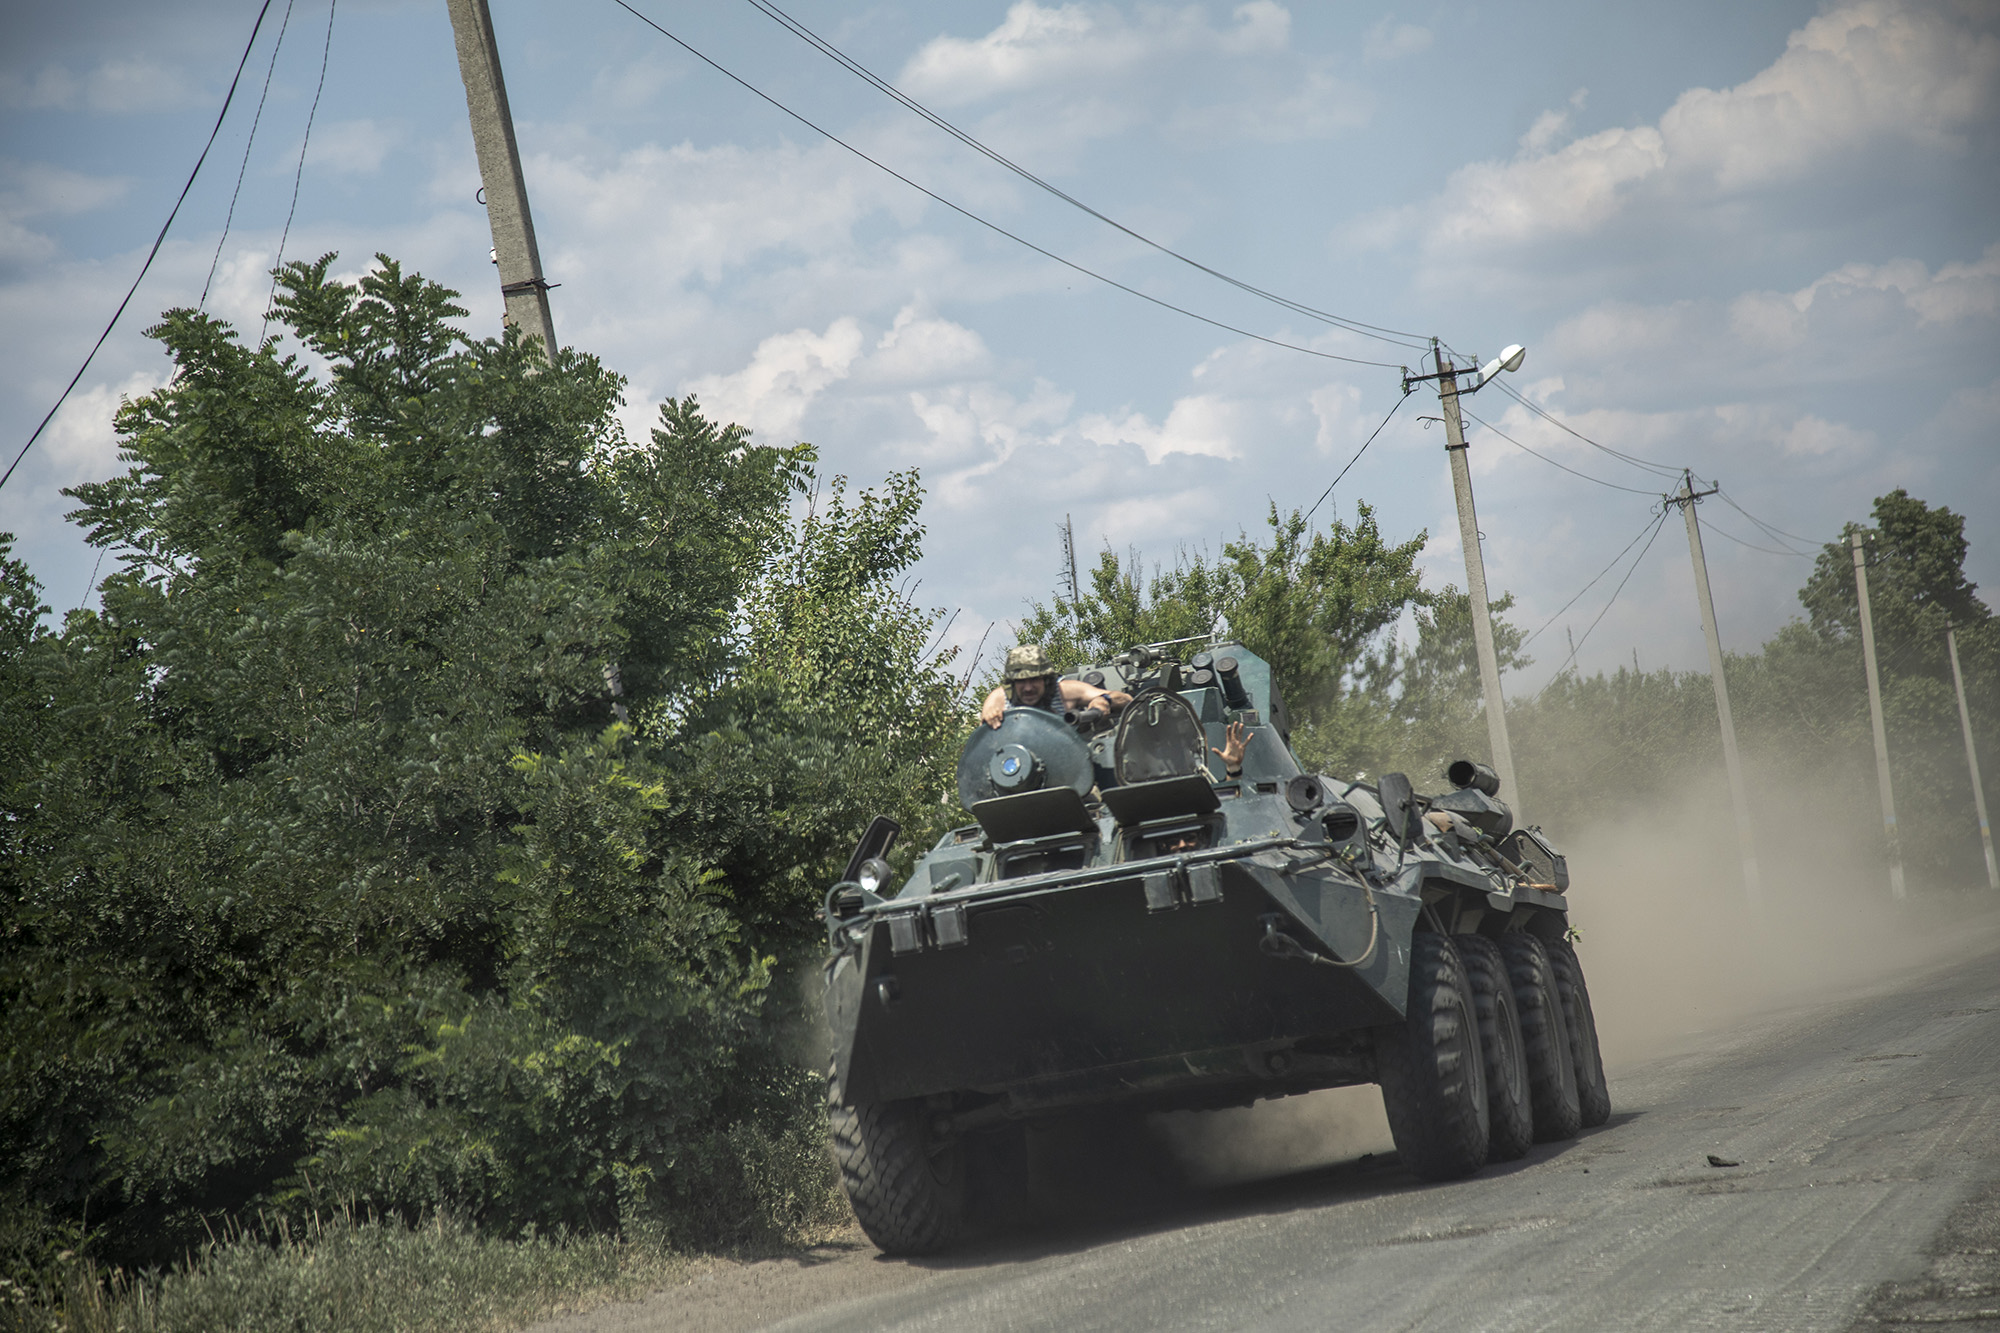 Ukrainian servicemen are seen riding on top of an armored personnel carrier in the Donetsk region, Ukraine, on July 5.